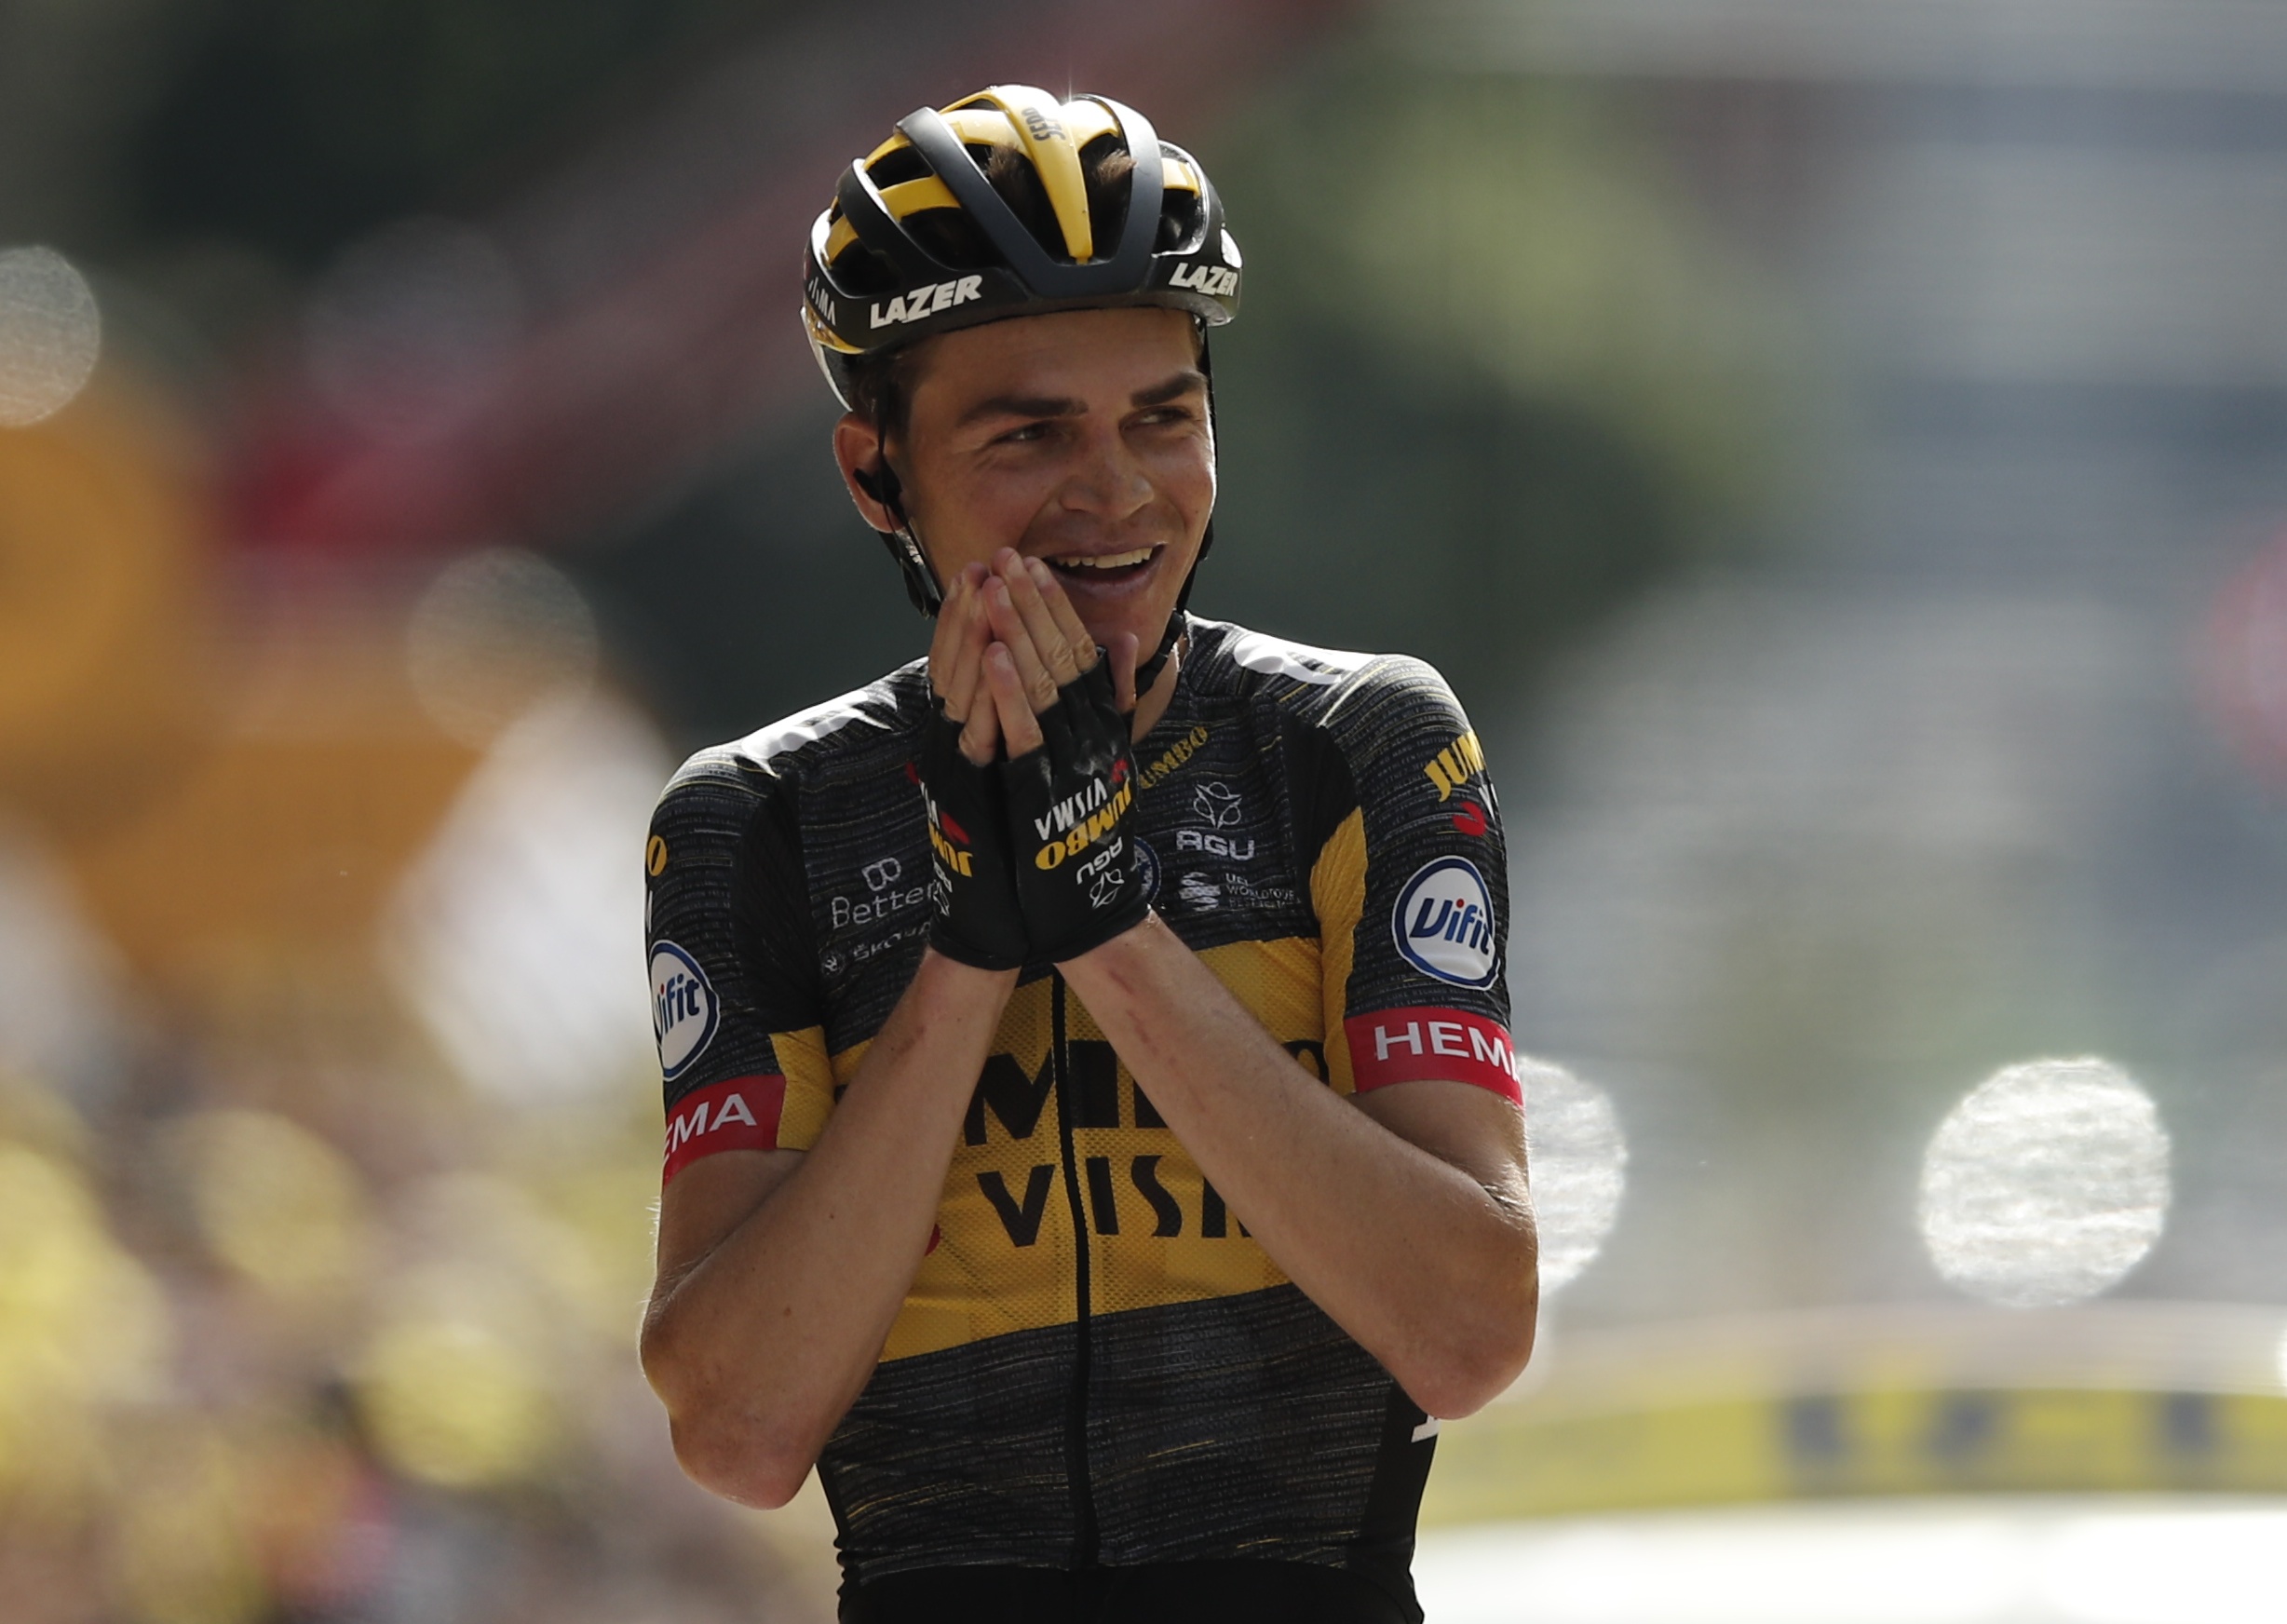 American Seb Cos Won 15th Stage of Tour de France